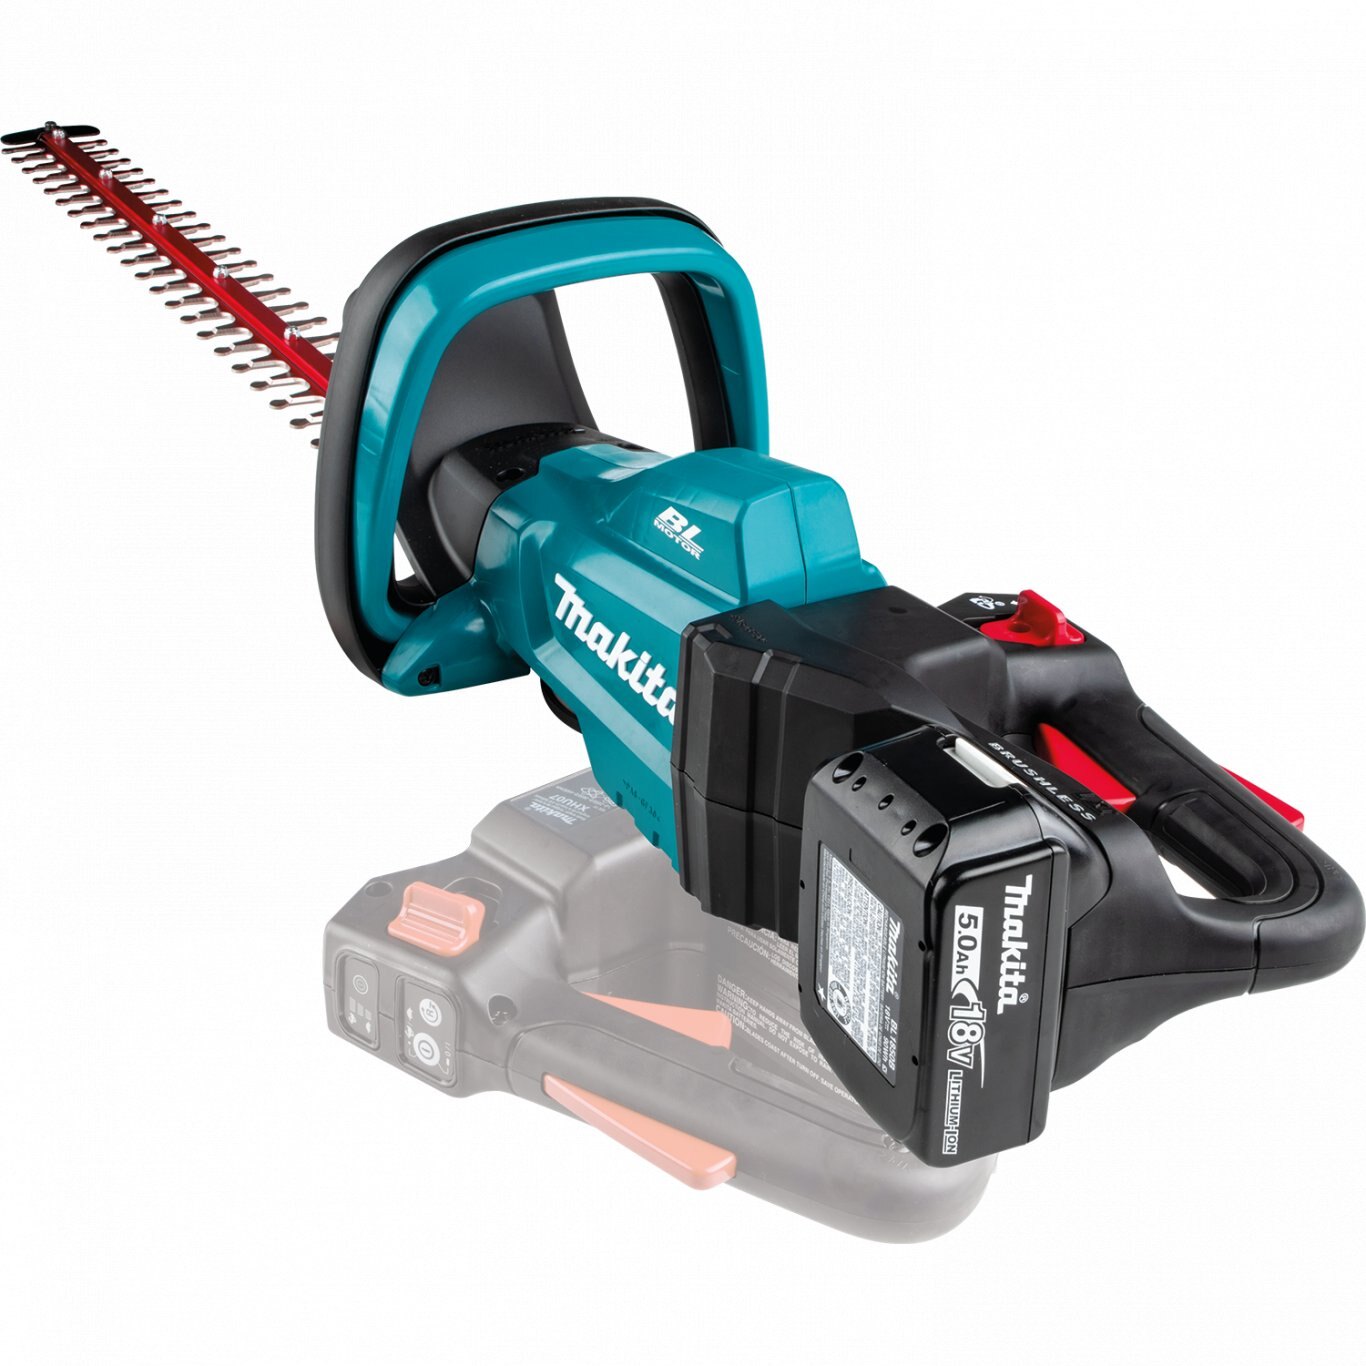 Makita 18V LXT® Lithium?Ion Cordless Grass Shear with Hedge Trimmer Blade, Tool Only